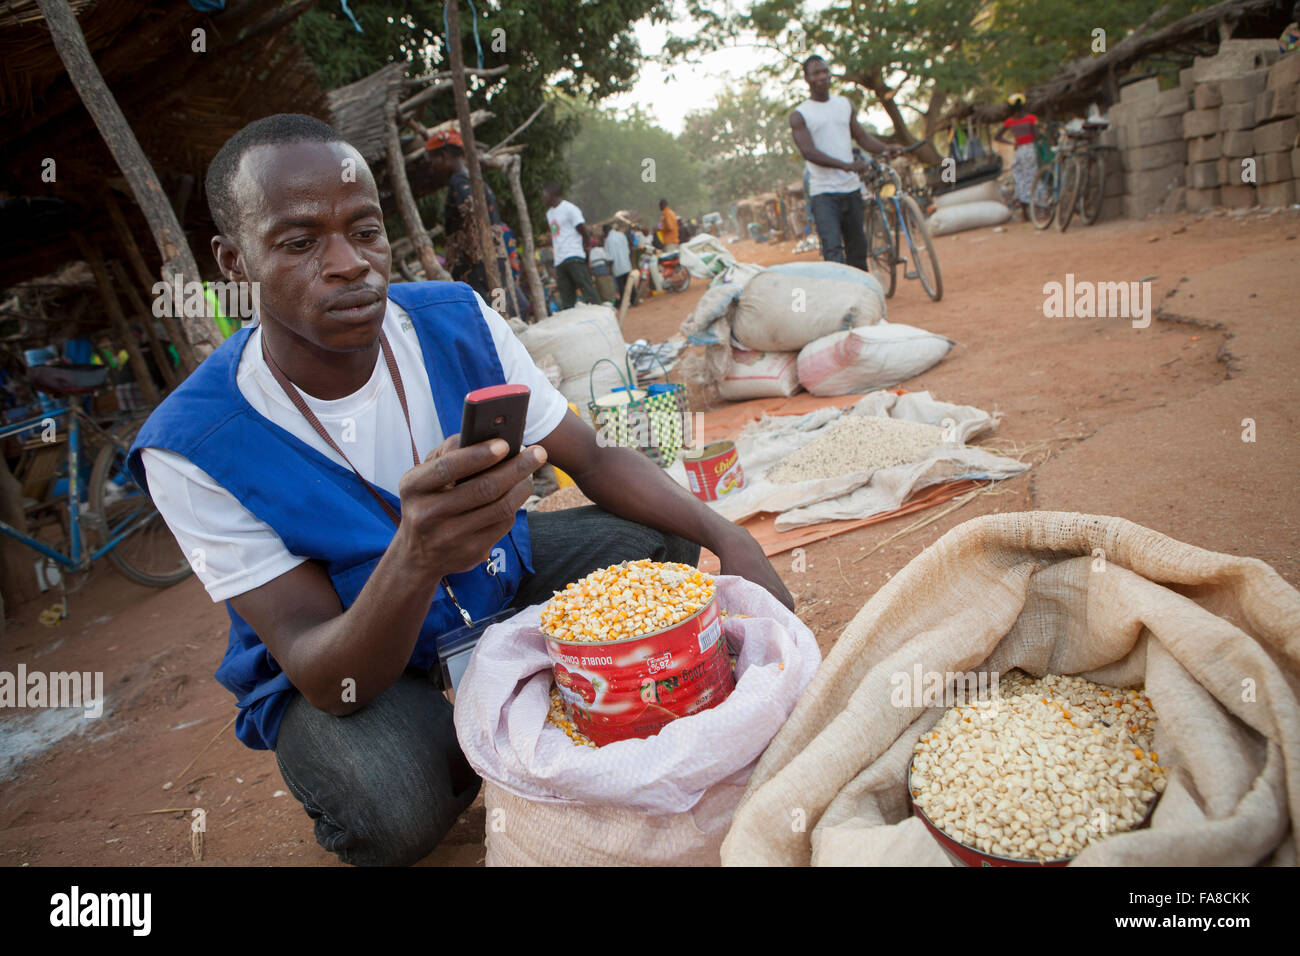 A commodities buyer uses mobile phone technology to compare prices at various markets in Burkina Faso, W. Africa. Stock Photo